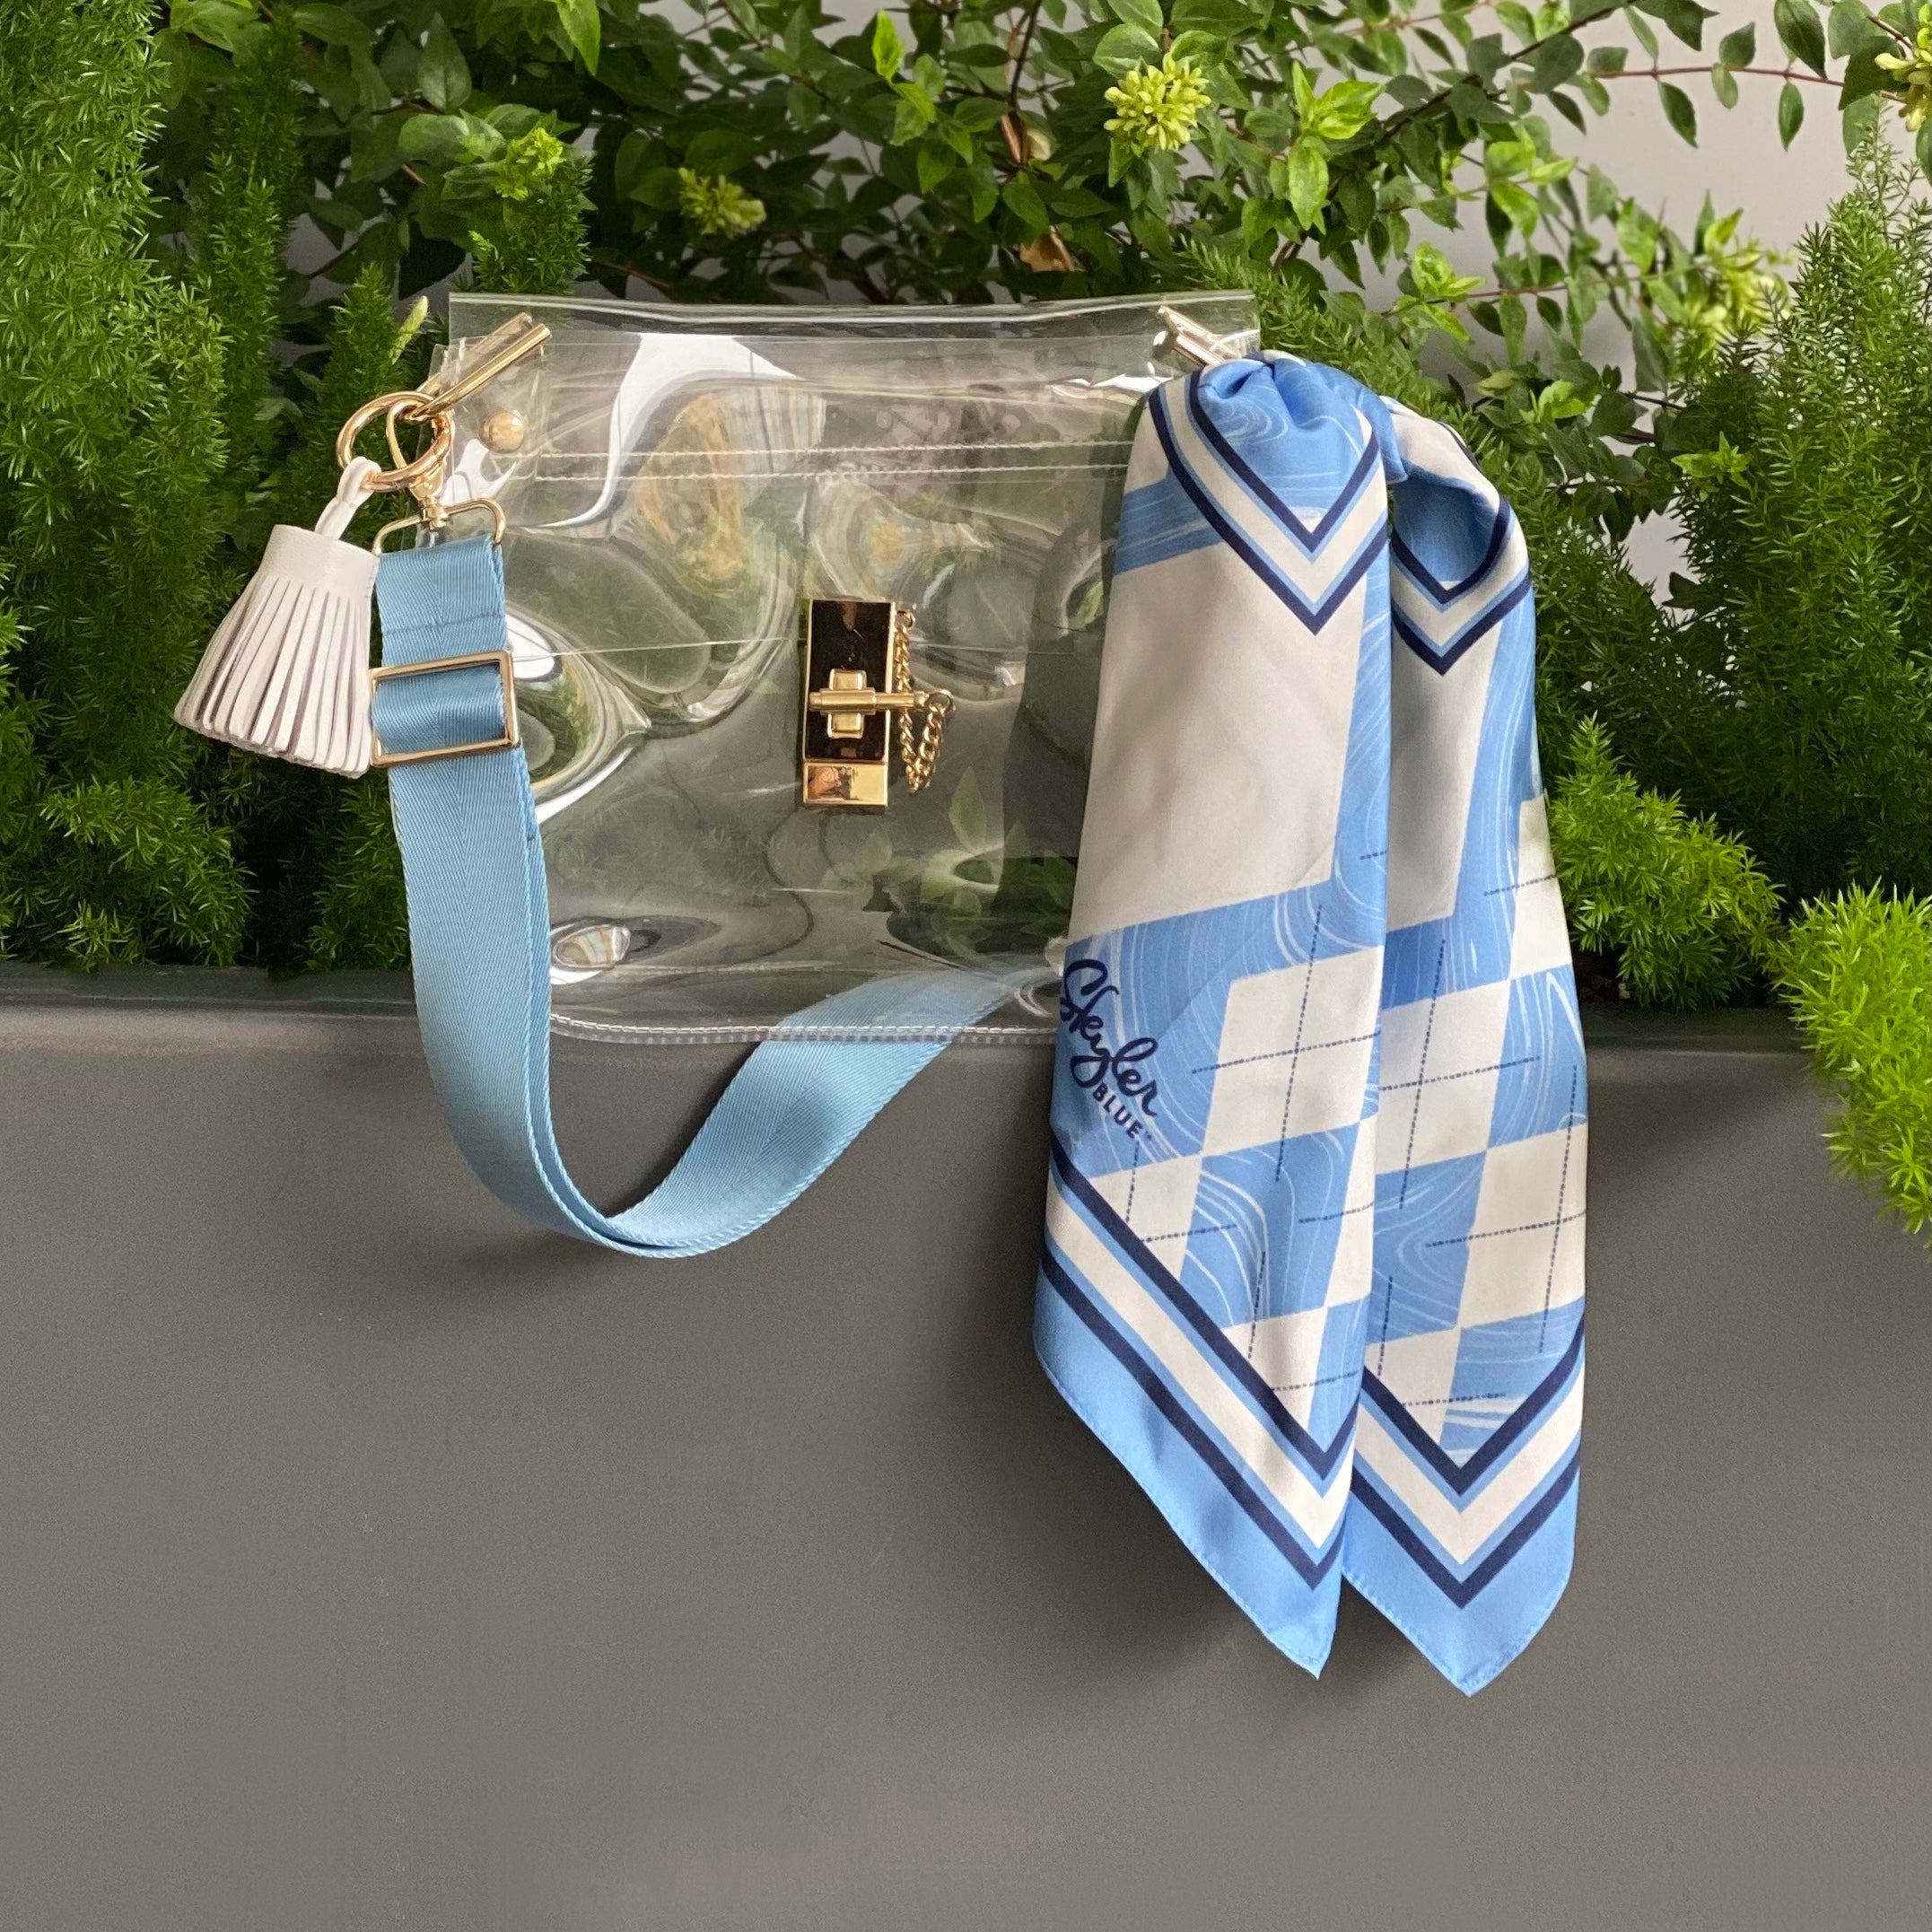 Skyler Blue’s The Chapel Hill Medium Saddle Clear Bag stadium approved clear bag / clear purse including adjustable, nylon webbing shoulder or crossbody strap with herringbone weave and gold hardware, 60-centimeter 100% silk twill scarf, and 100% genuine leather tassel. 